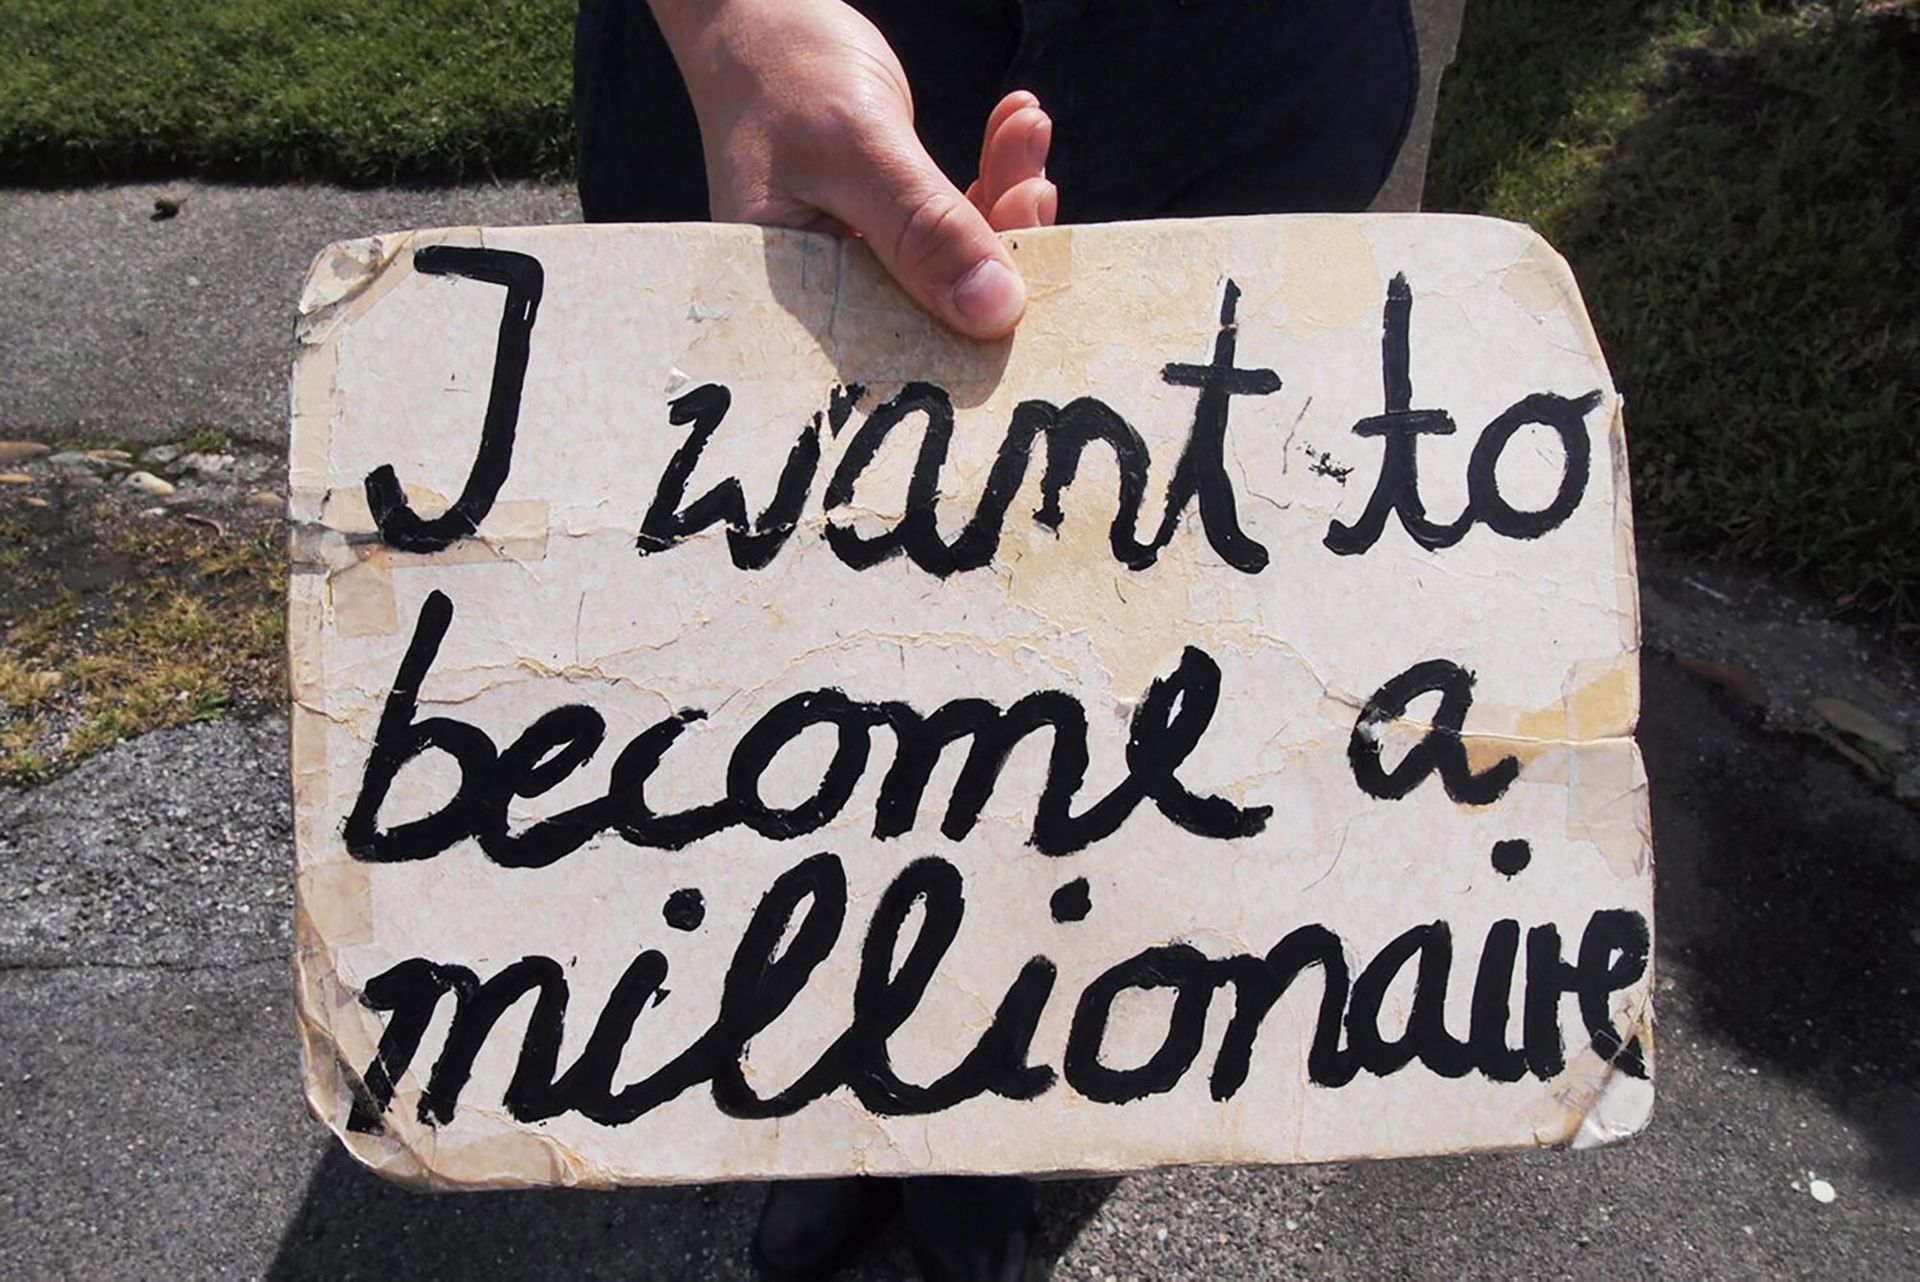 I want to become a millionaire, since 2010, performance + sign + signed and numbered sheets, 10.5 × 14.5 cm. Since 2010, Thomas Geiger is selling stamped and signed sheets with a sequential number for 1€ each. What started as a street performance, became a private funding system that supports his collabora- tive projects which are dedicated to public space and publishing. To date, he has raised more than 35.000€.